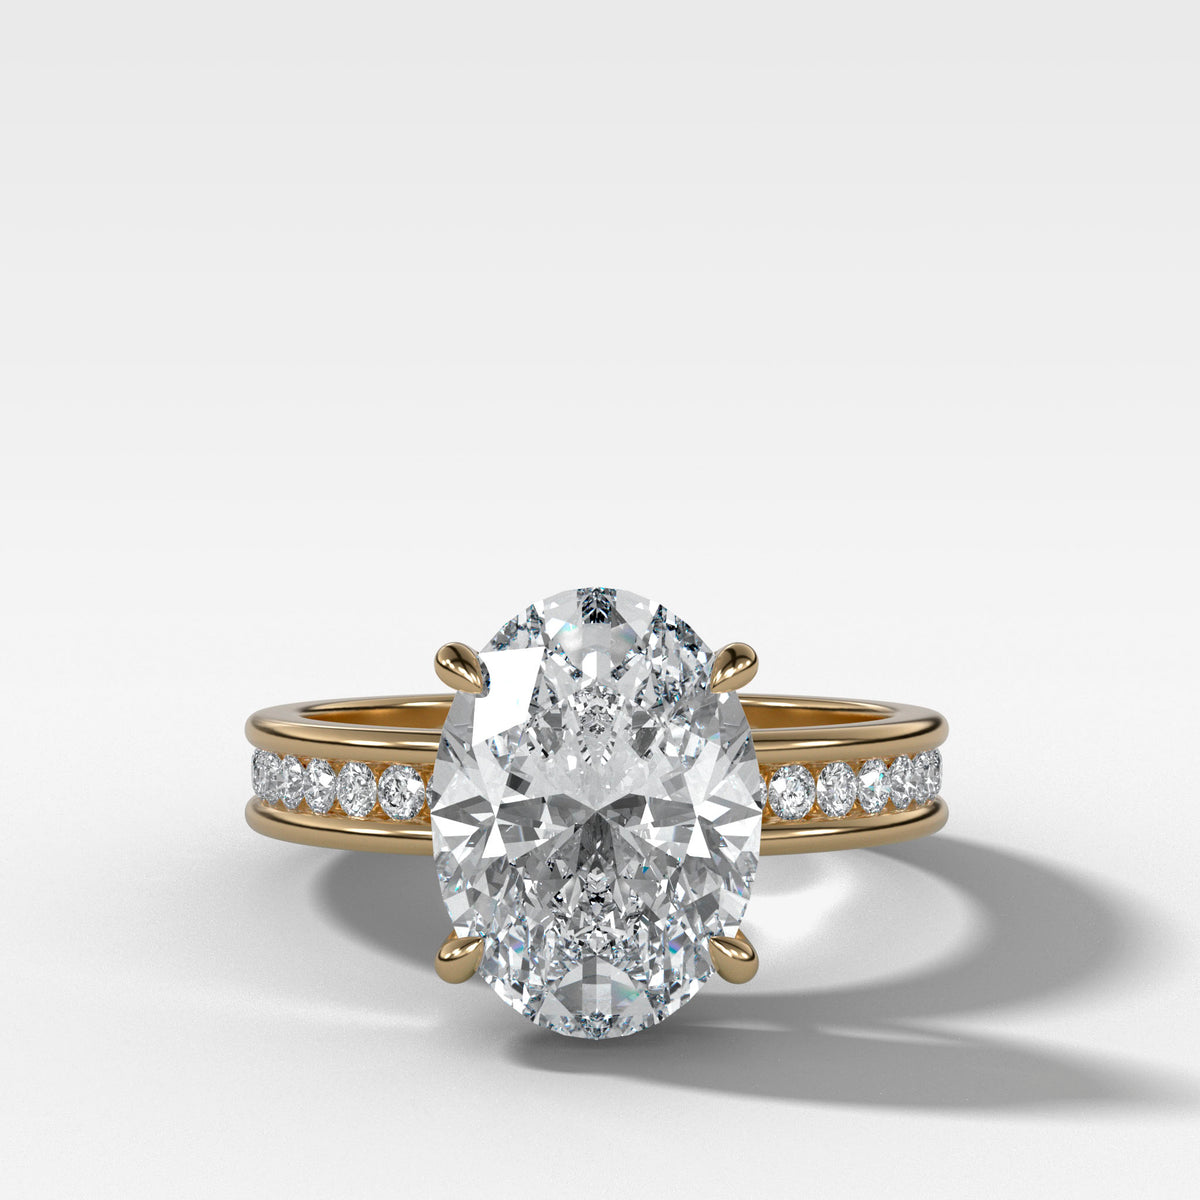 Petite Channel Set Engagement Ring with Oval Cut Diamond